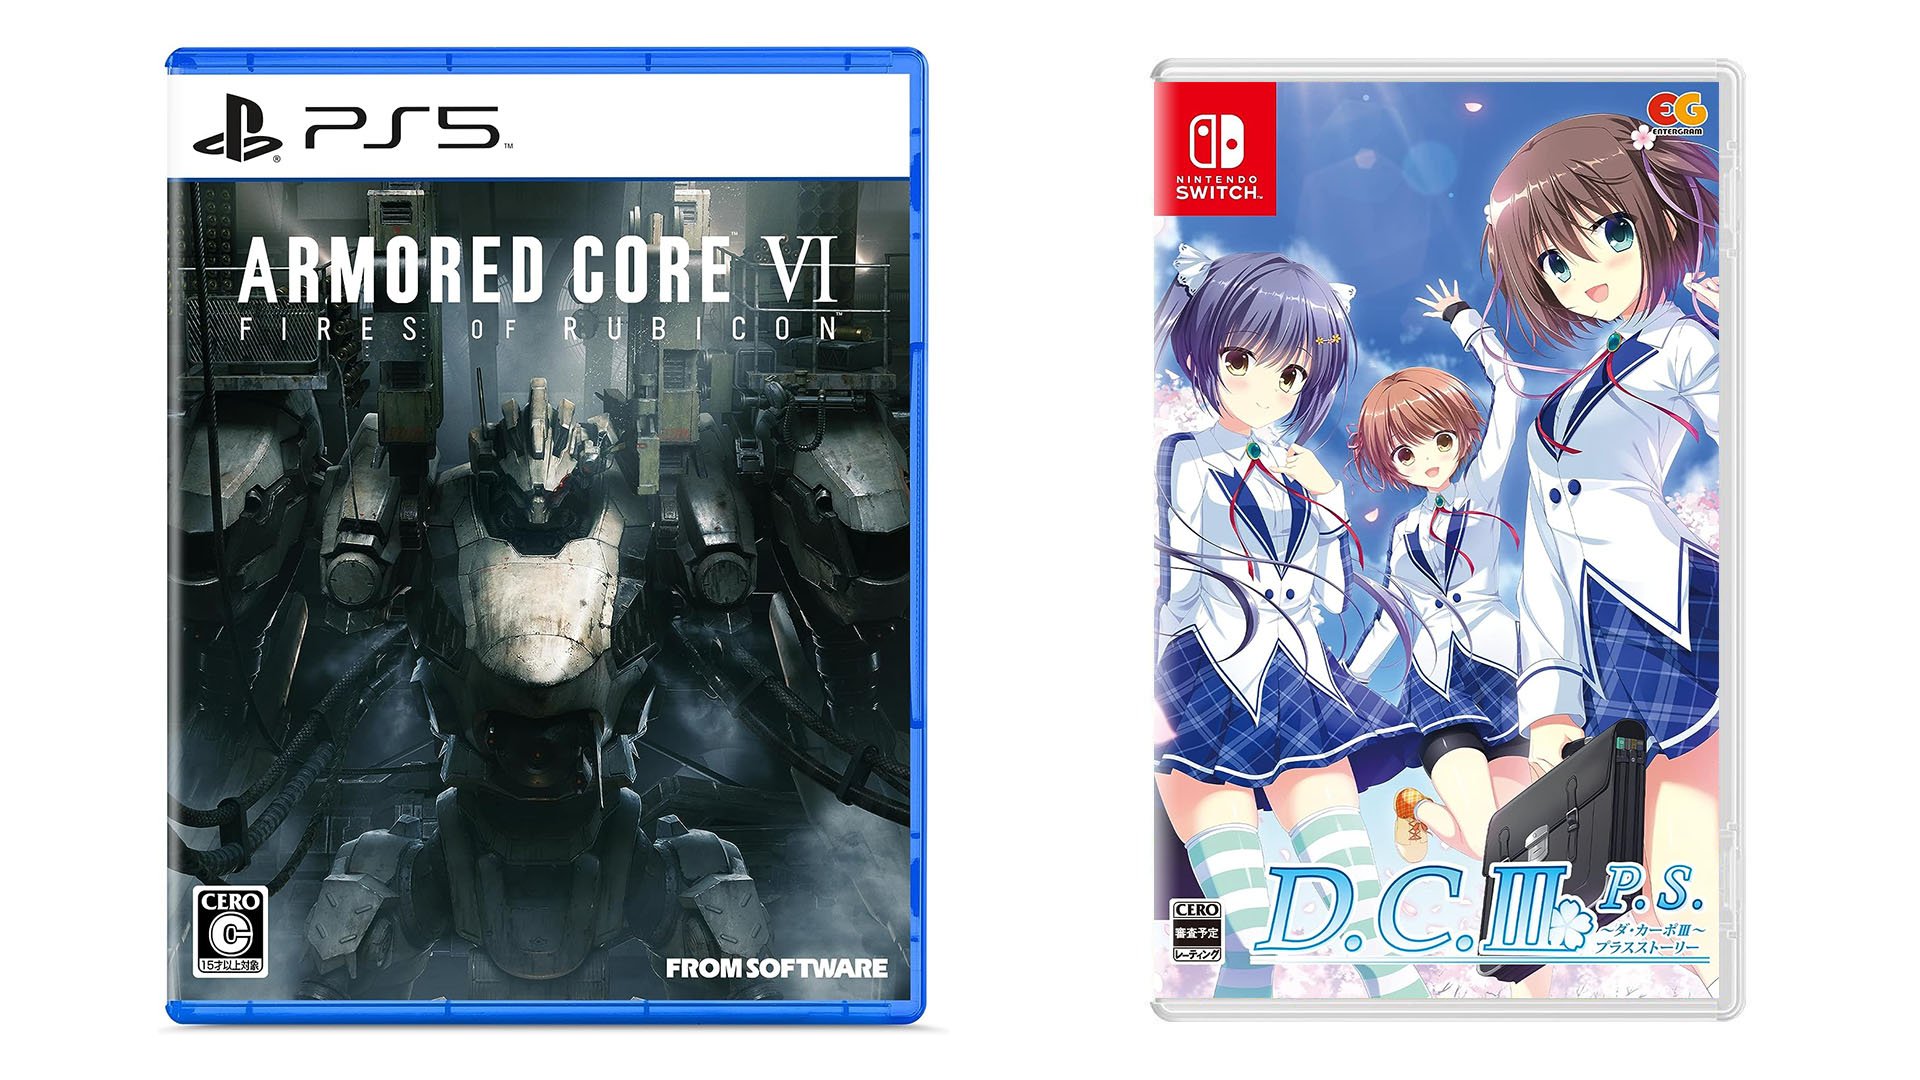 #
      This Week’s Japanese Game Releases: Armored Core VI: Fires of Rubicon, D.C.III ~Da Capo III~ Plus Story, more